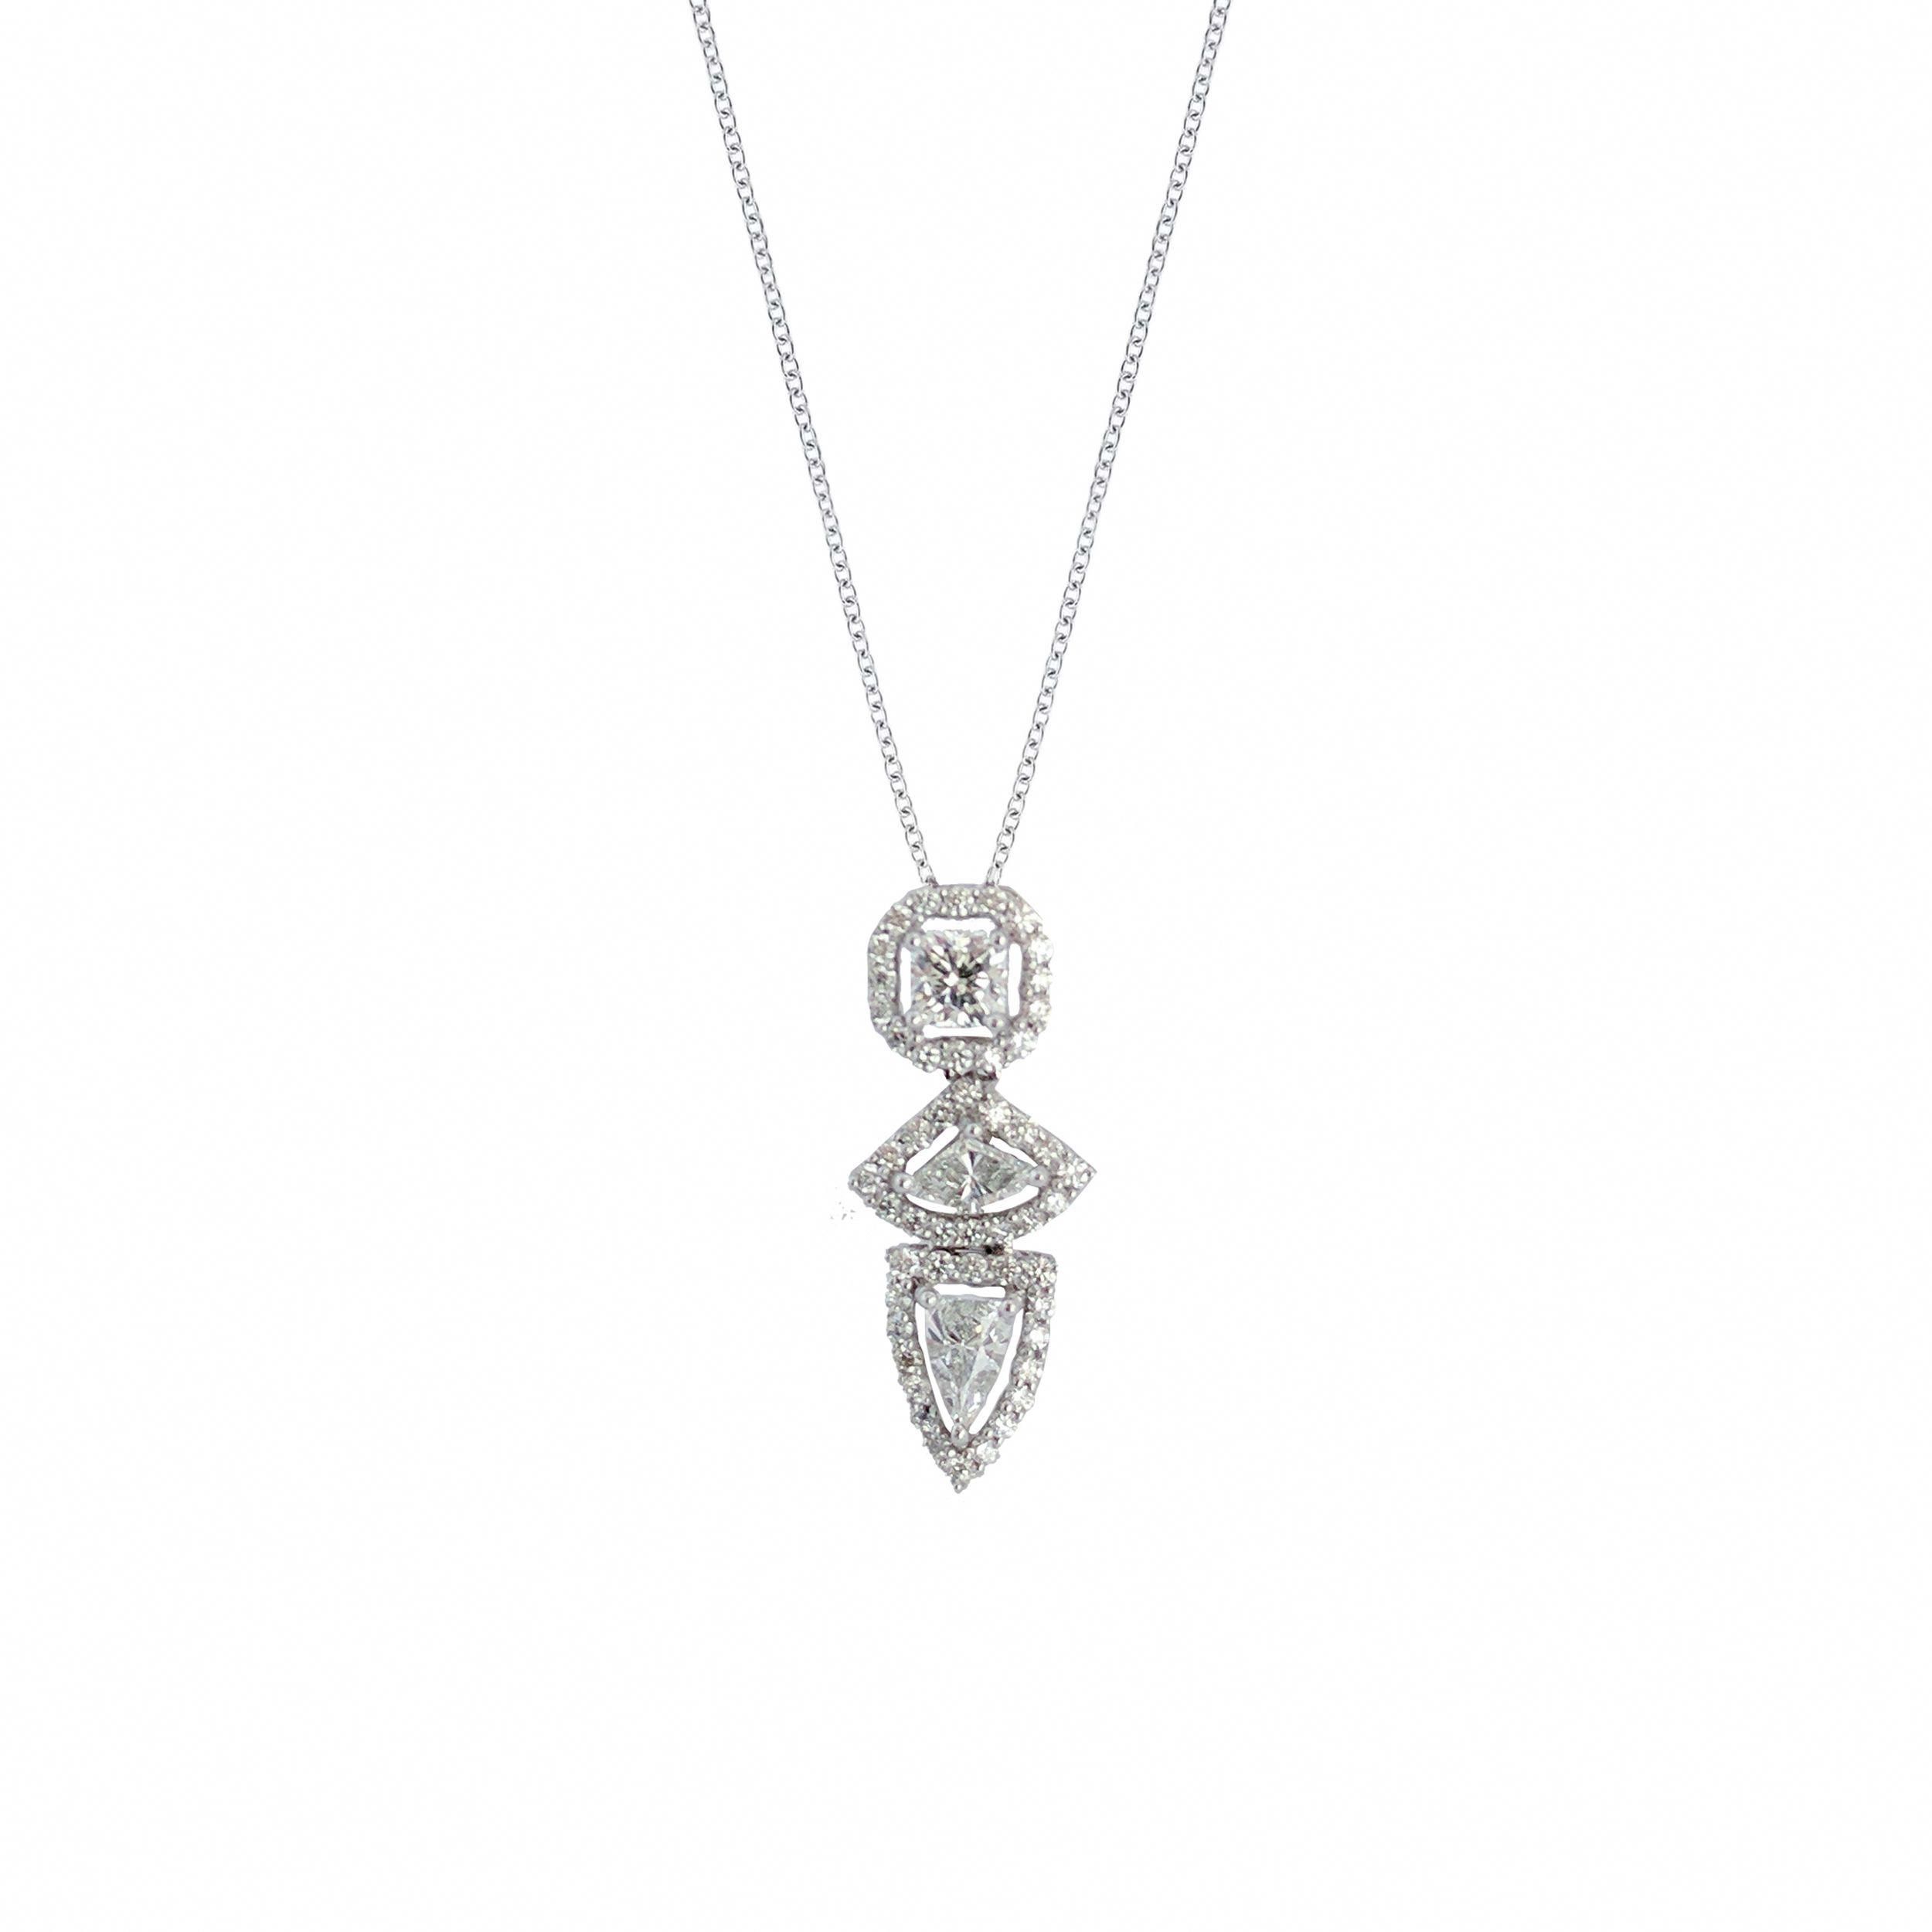 Three Diamond Vertical Necklace With Fancy Shield Shape, Square, And Regarding Recent Square Sparkle Halo Necklaces (View 15 of 25)